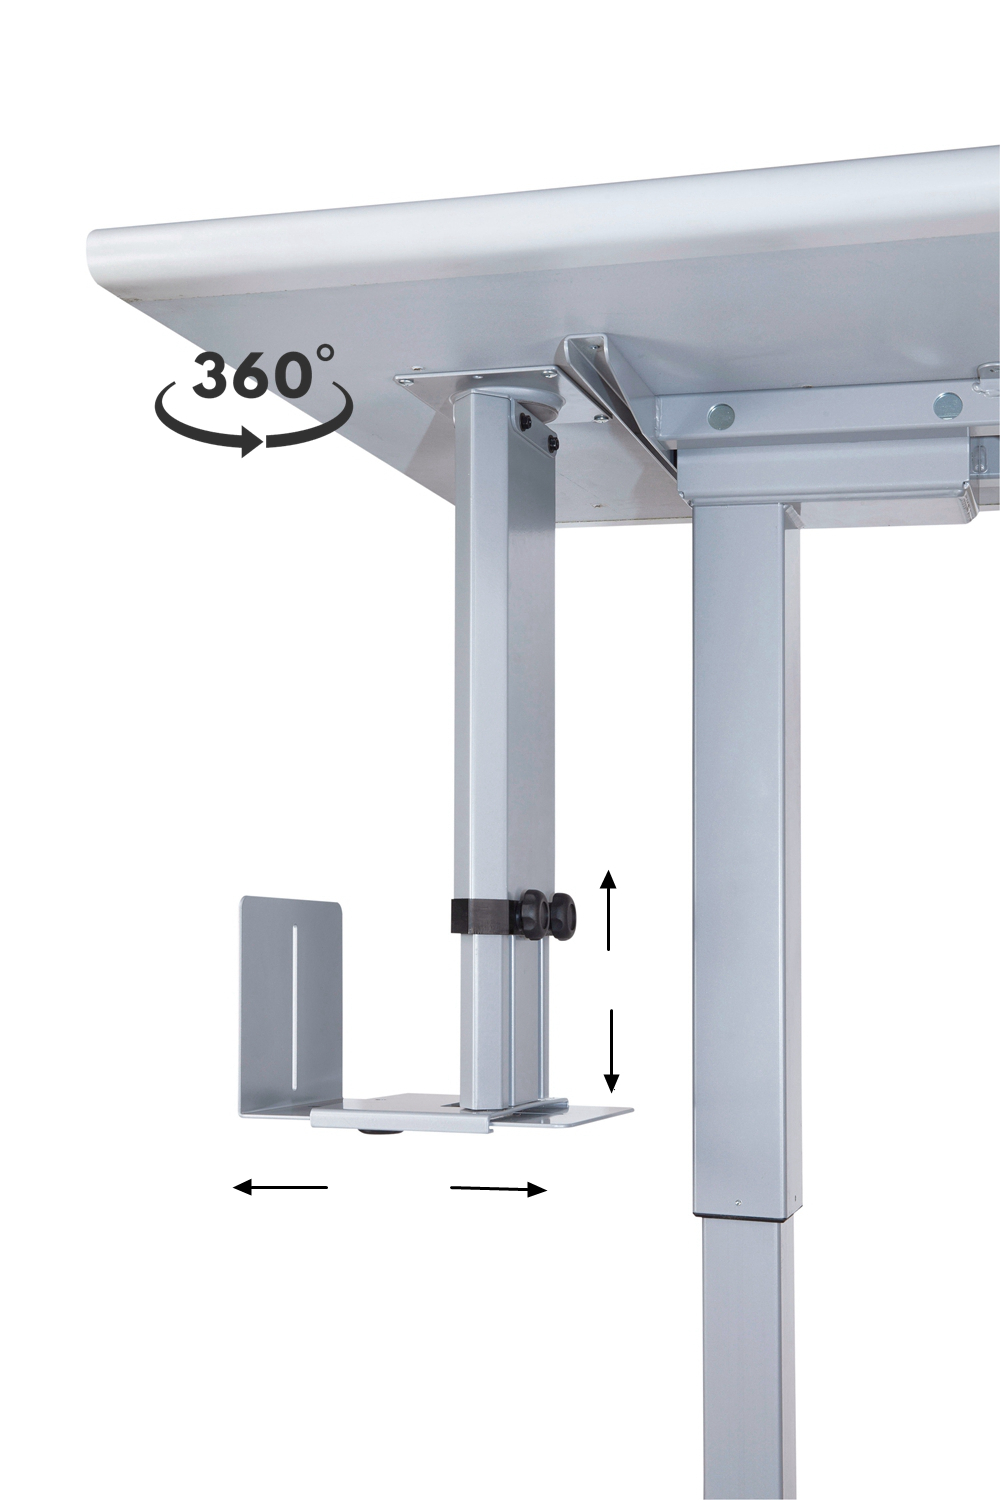 https://www.cdgreatindustry.com/upload_files/products/Sit-Stands/SP401/SP401s1_-_fu_zhi.jpg